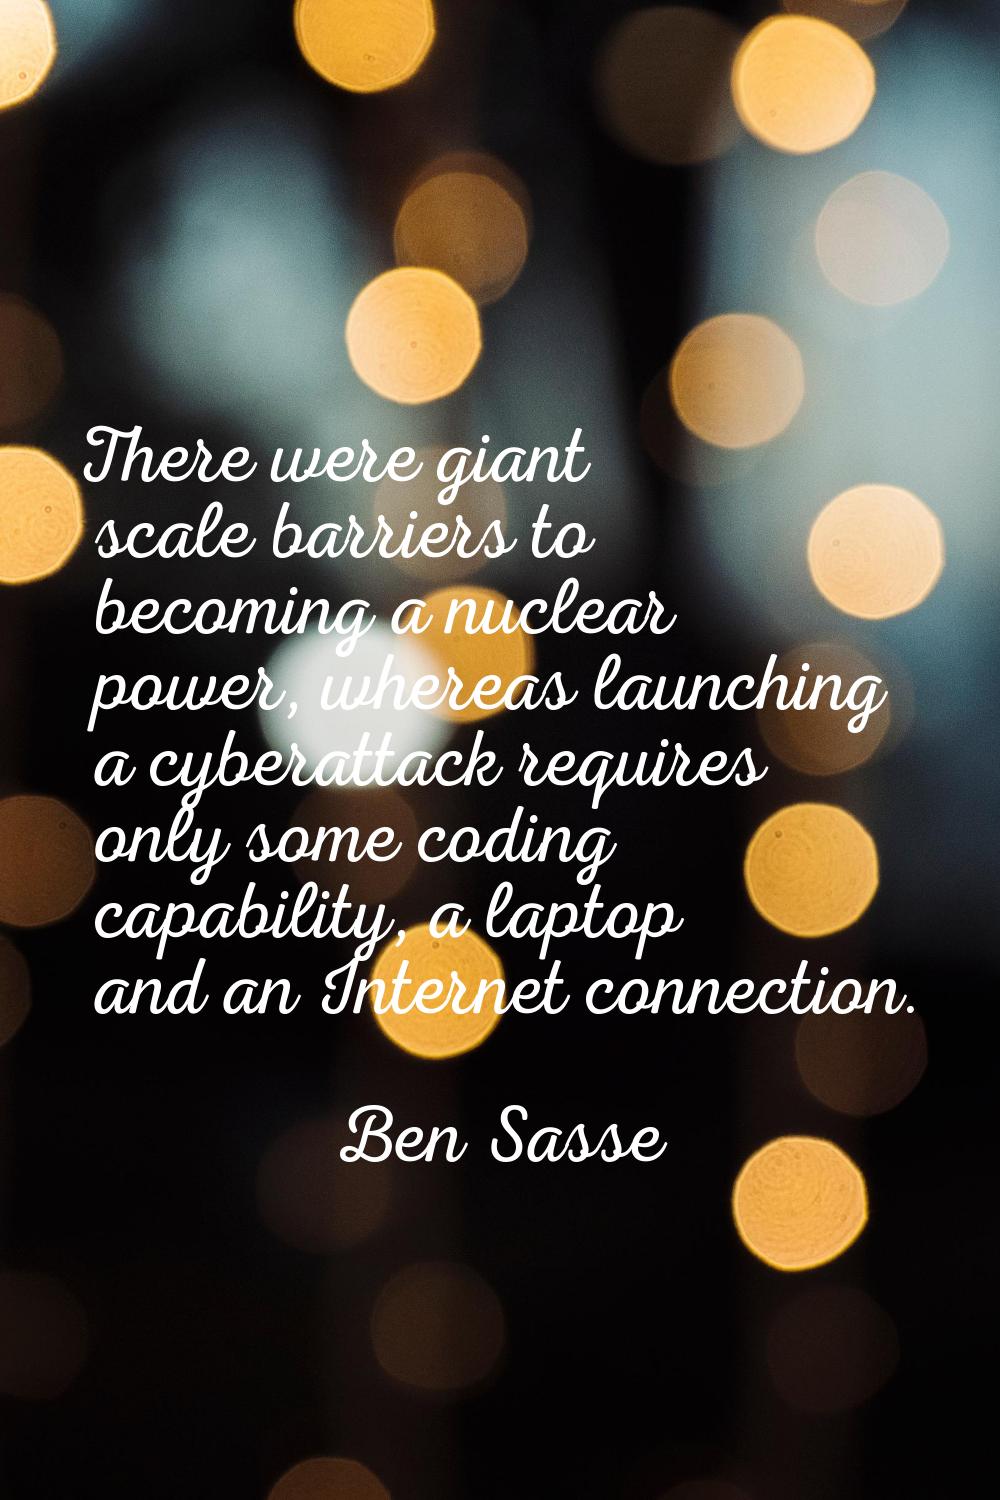 There were giant scale barriers to becoming a nuclear power, whereas launching a cyberattack requir